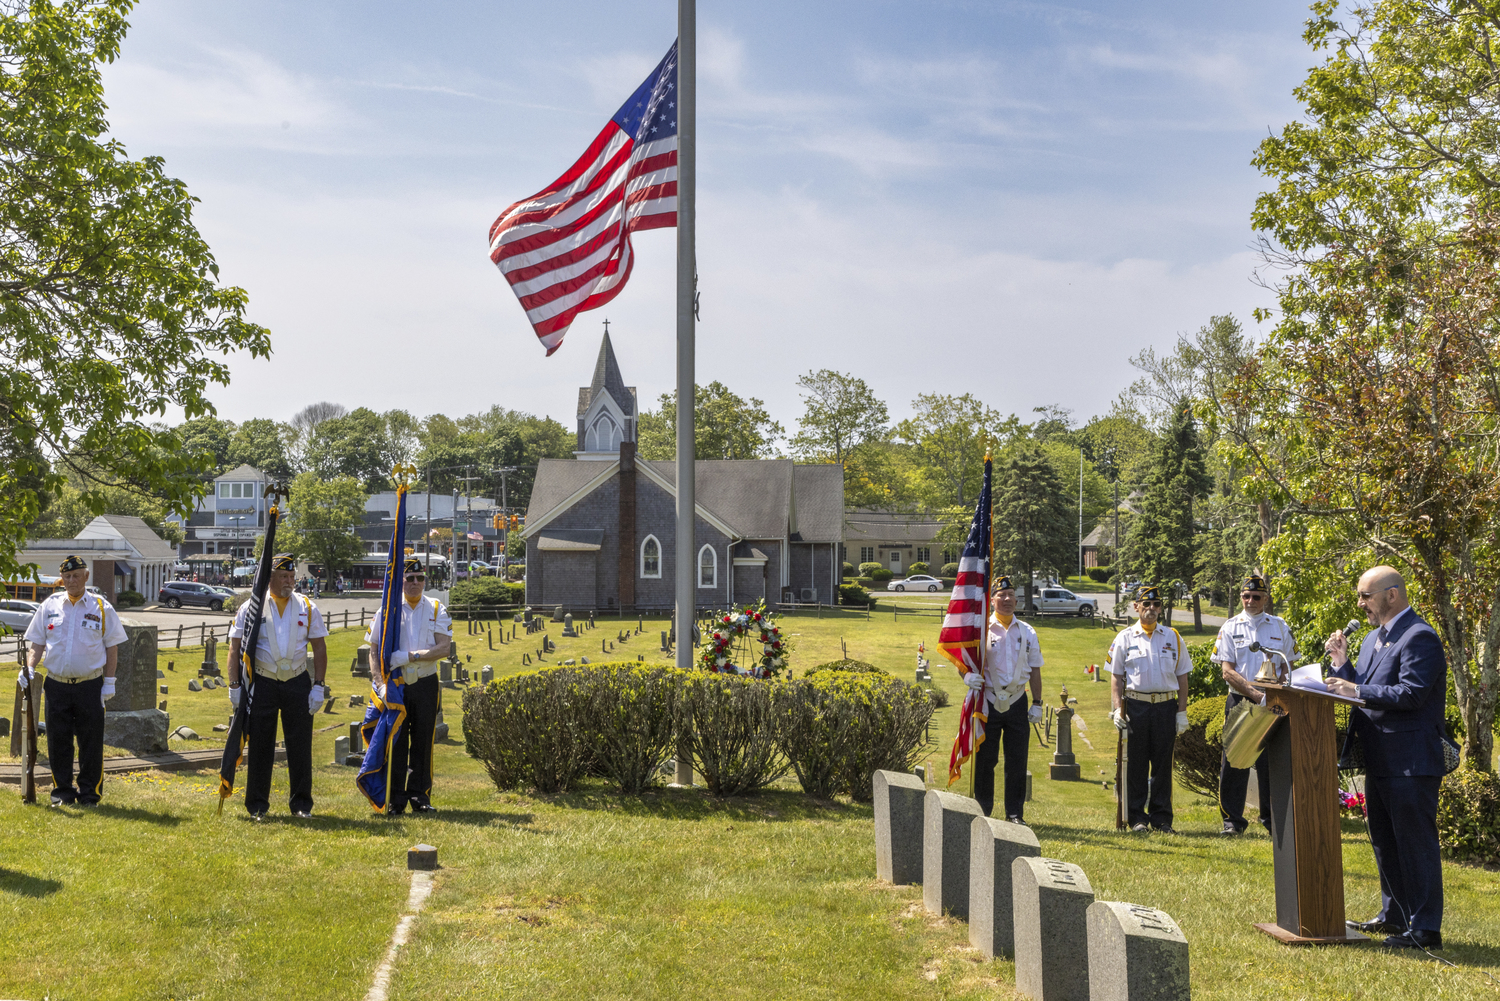 Memorial Day observations in Hampton Bays on Monday.